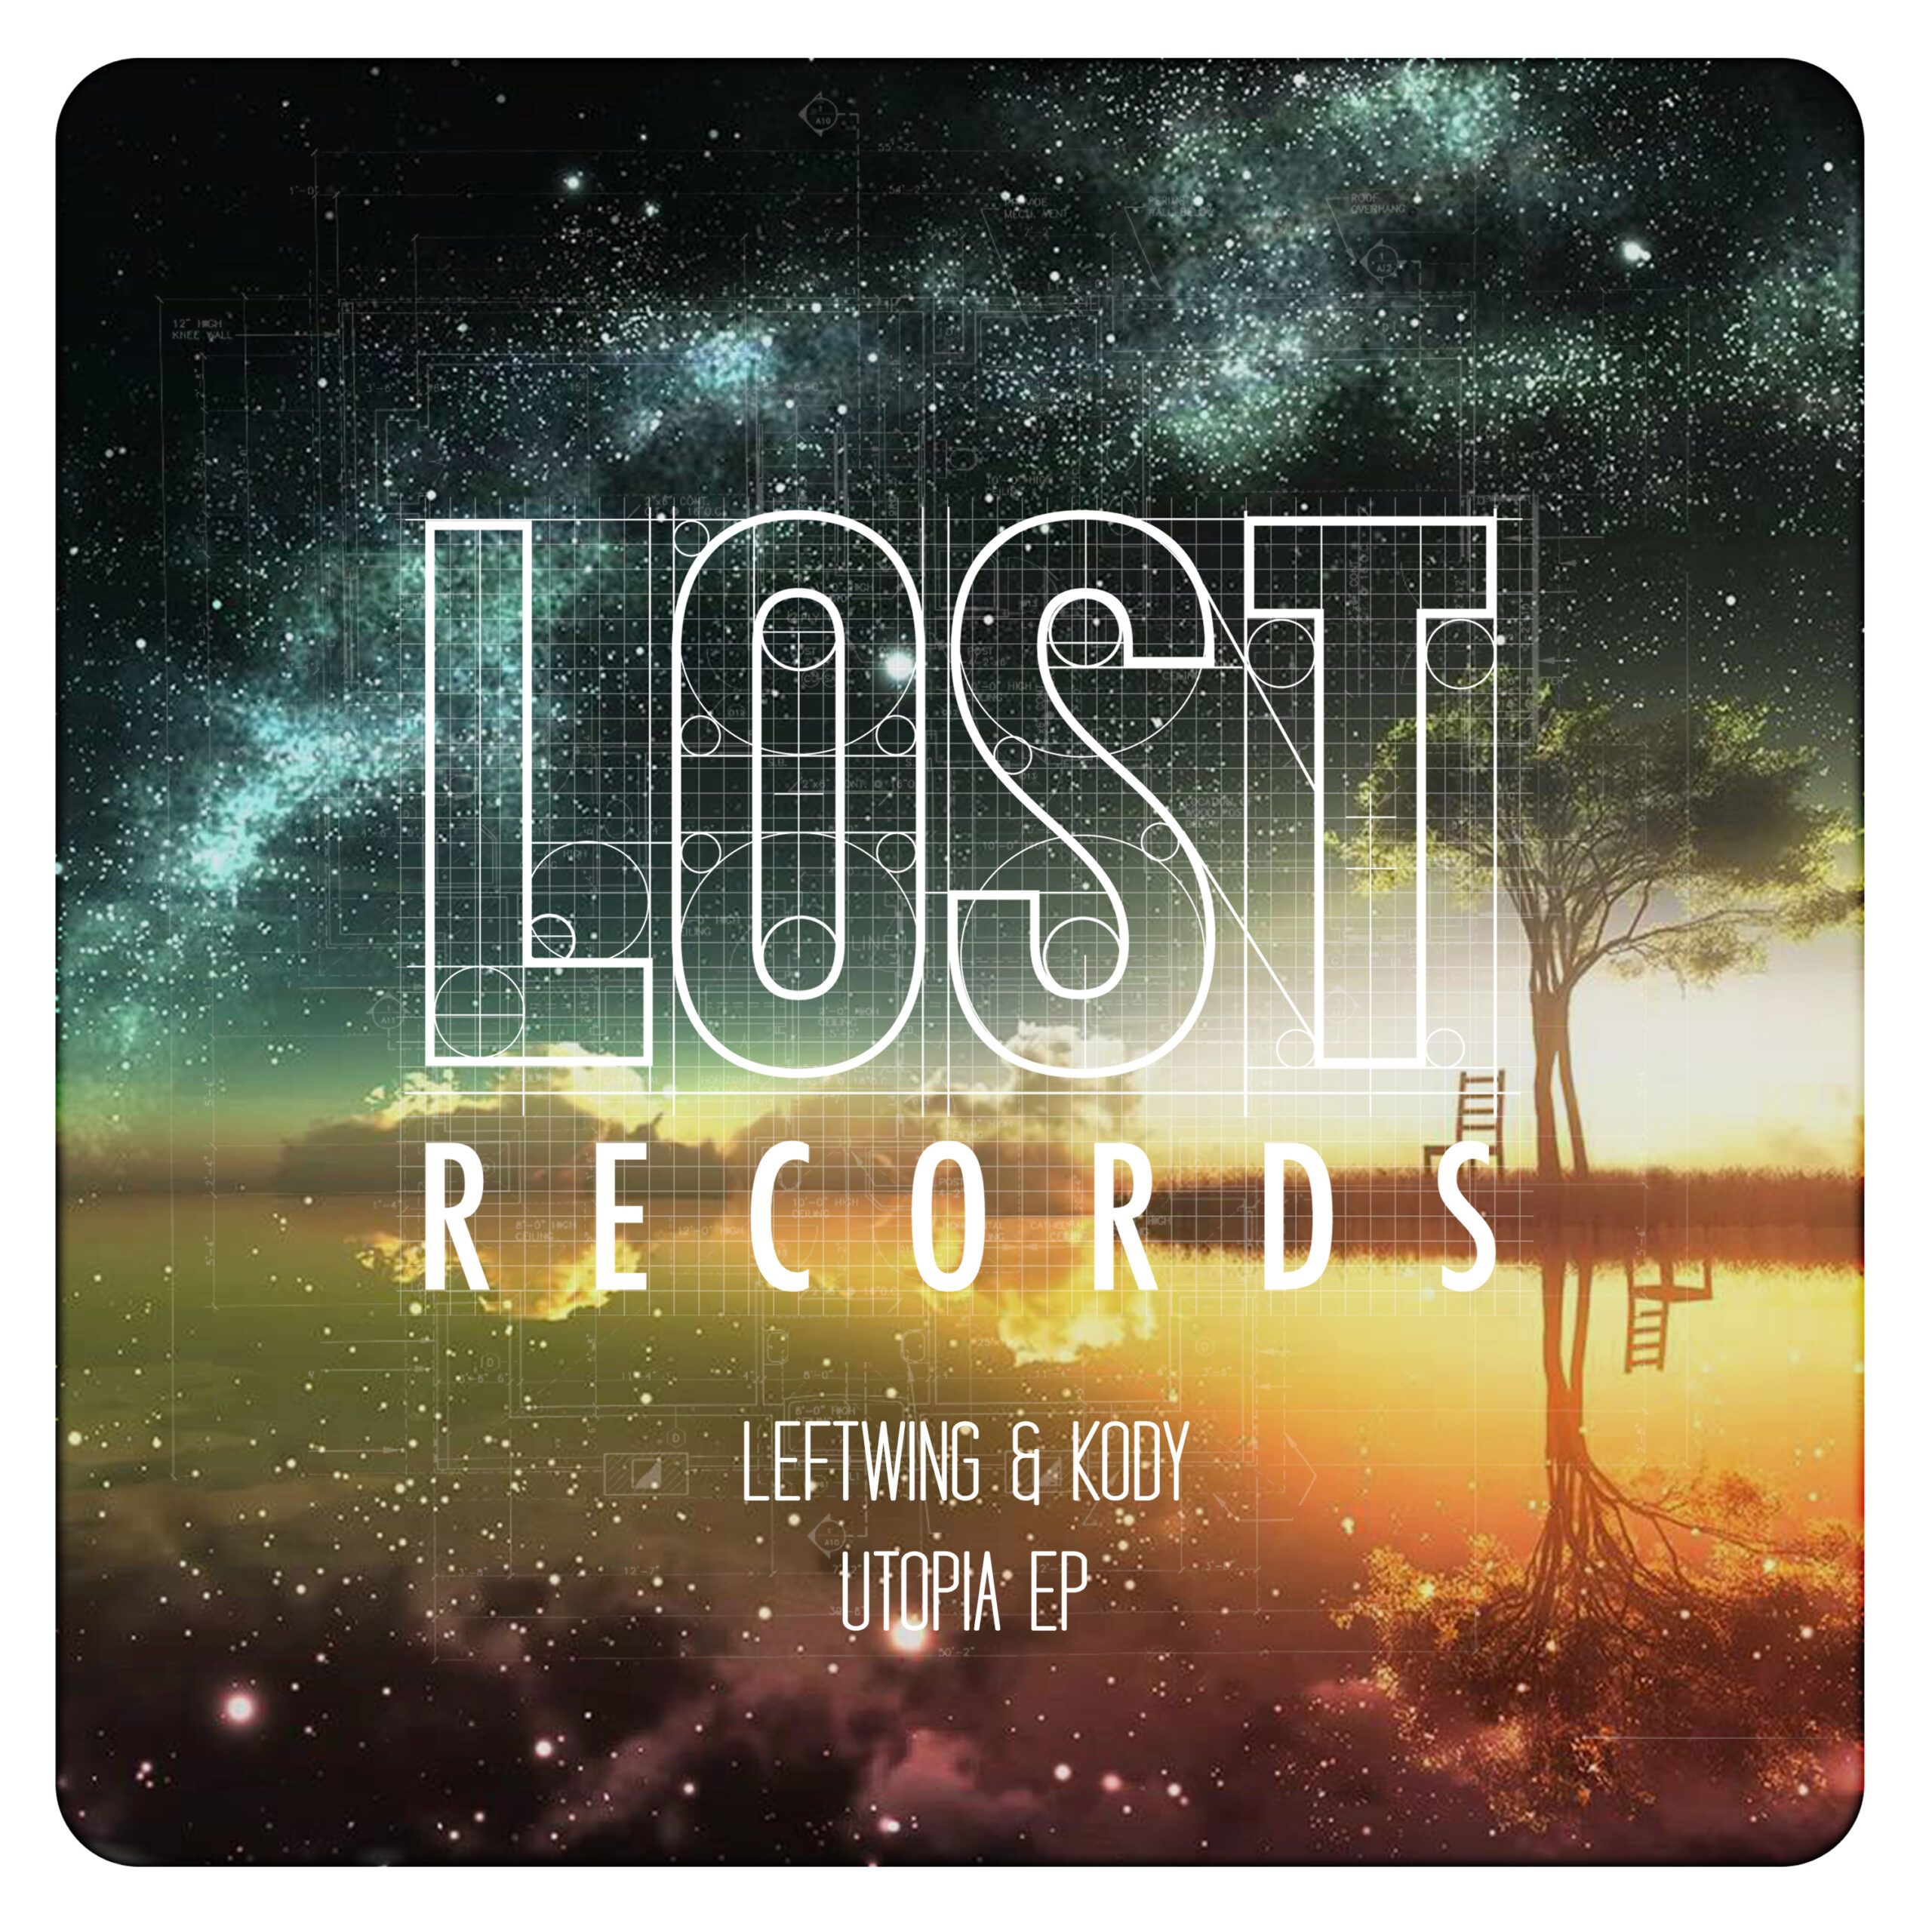 pack_shot_leftwing_kody_-_utopia_ep_-_lost_records.jpg